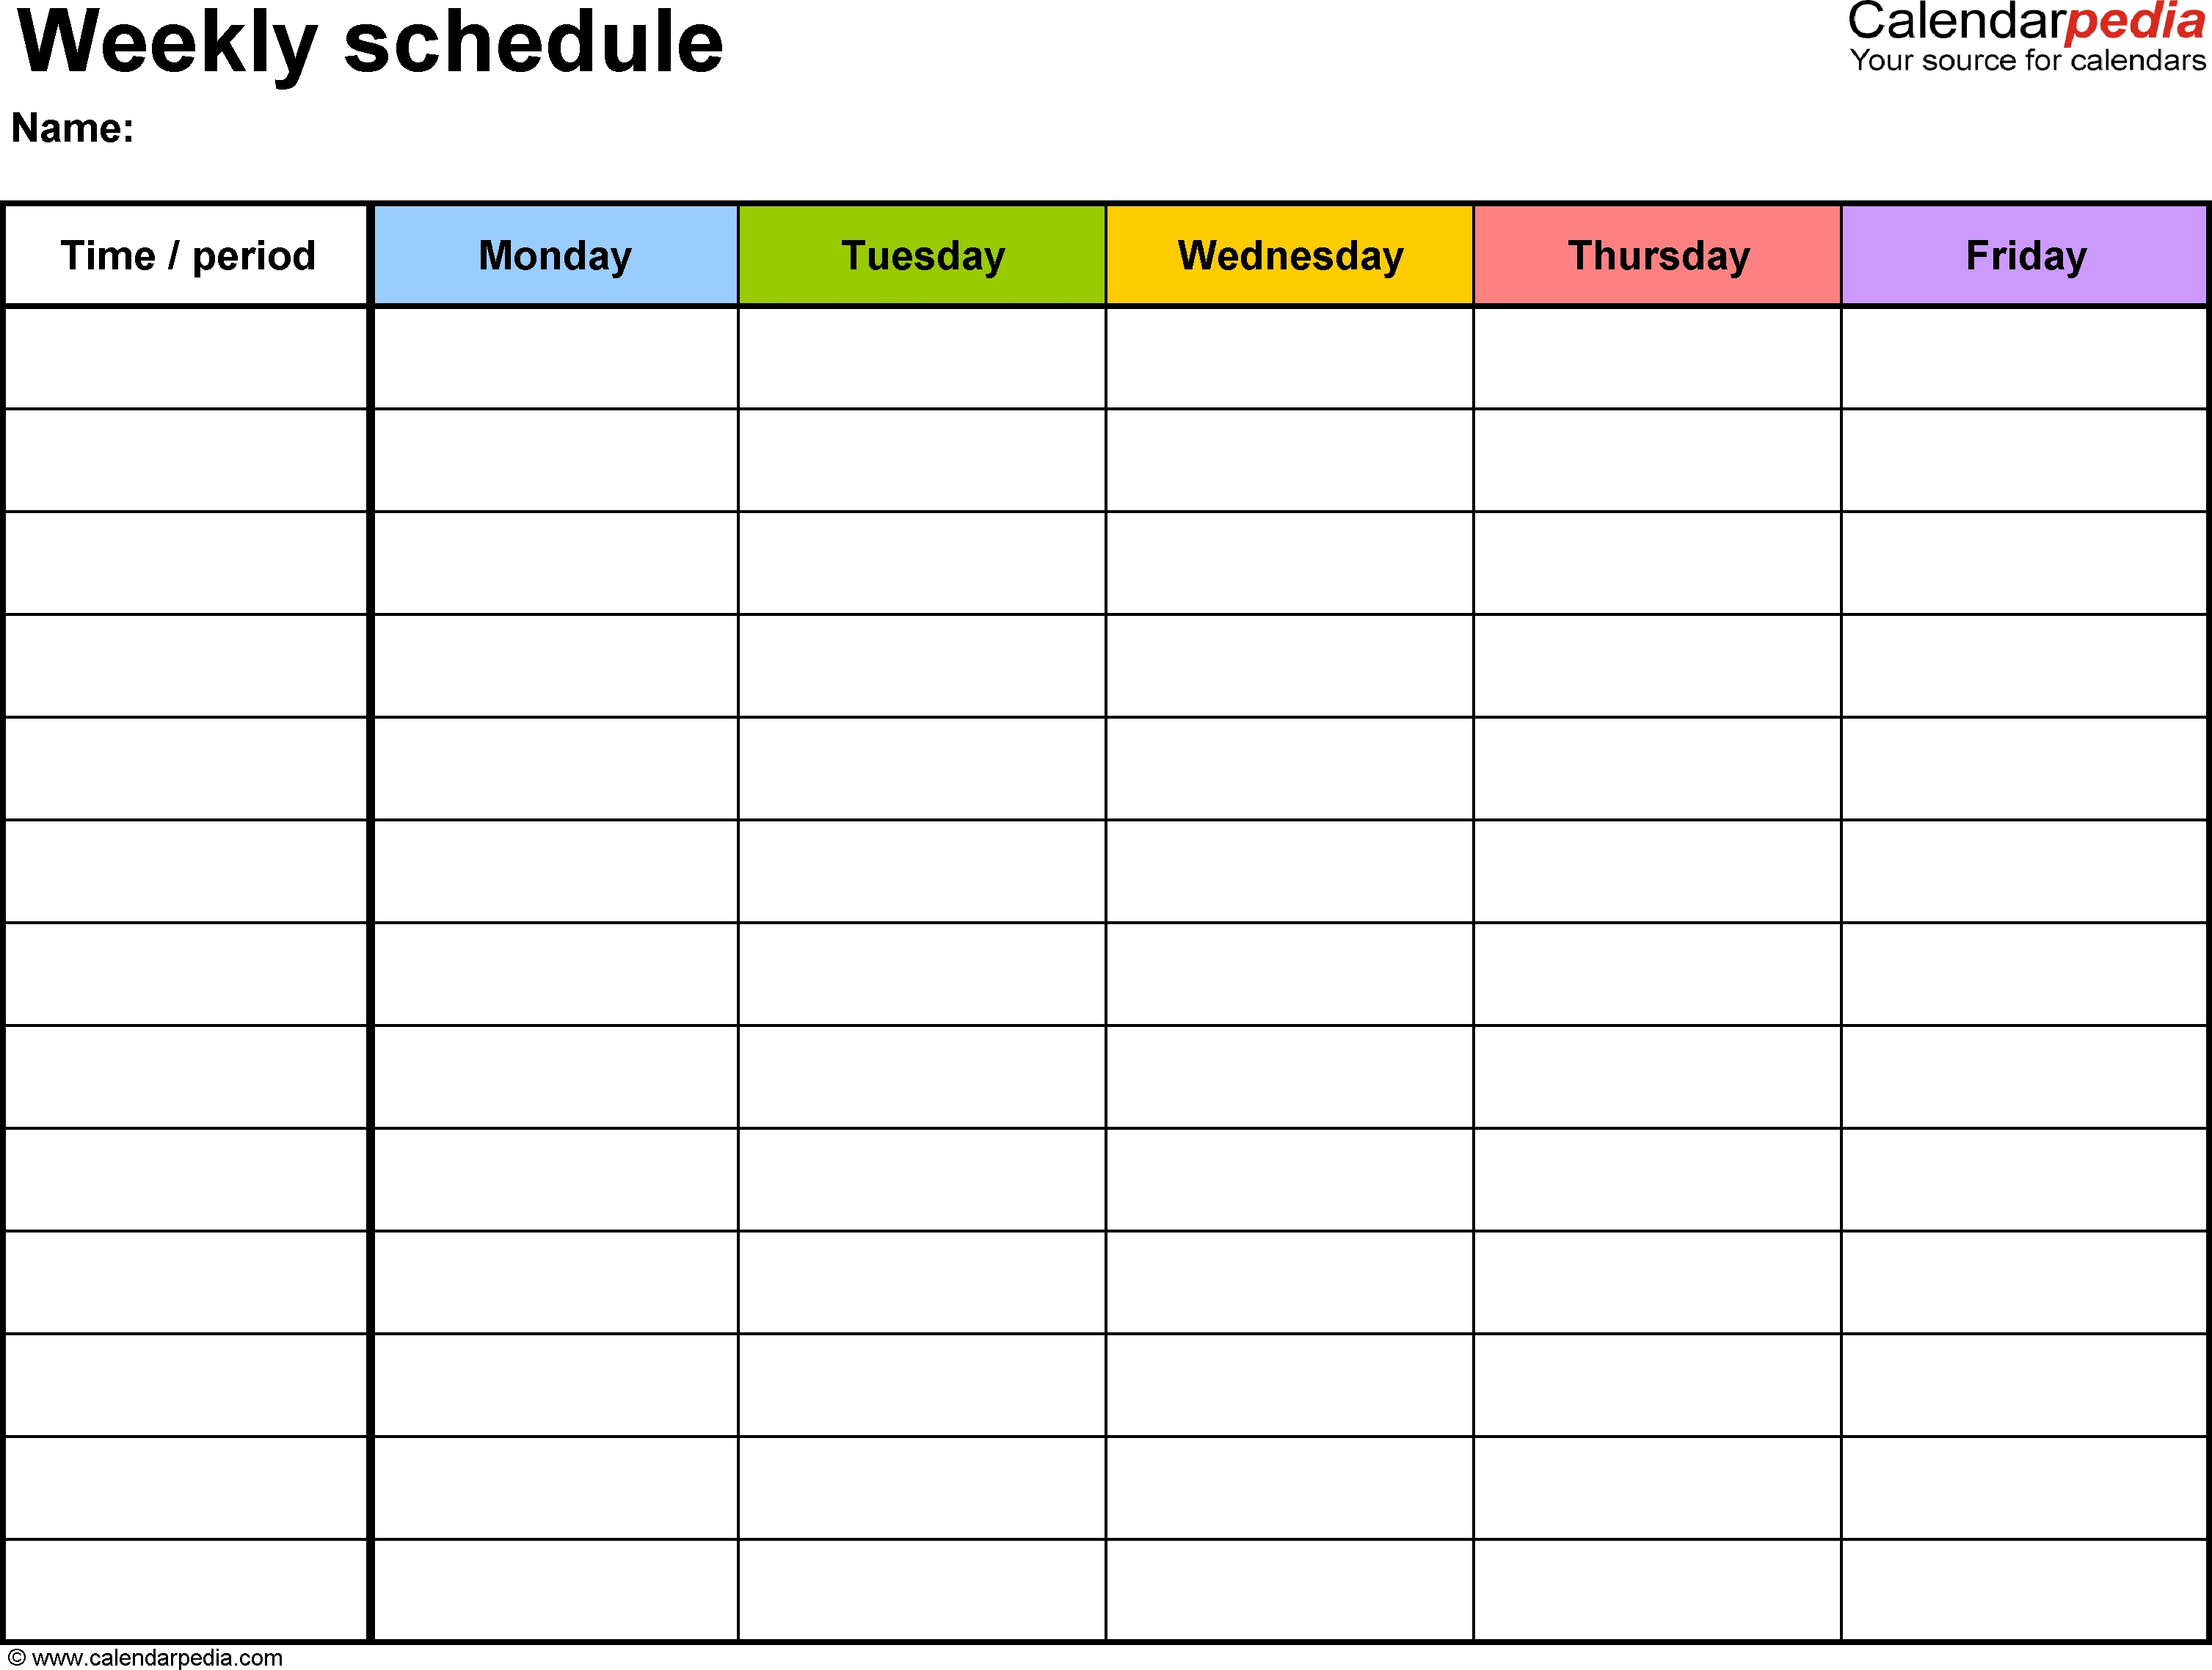 Free Weekly Schedule Templates For Word - 18 Templates pertaining to Template For Monday Through Friday School Schedule